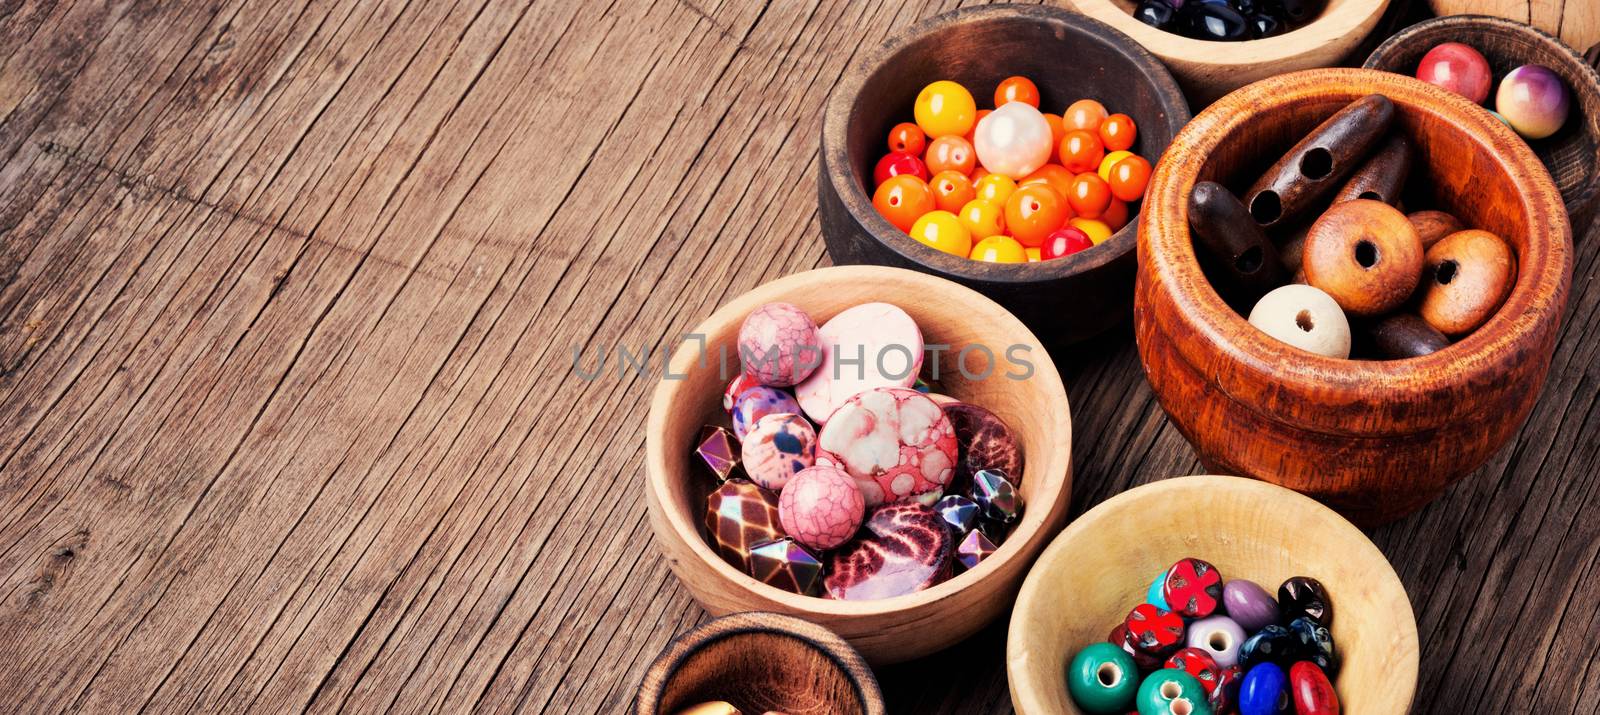 Fashion beads in wooden bowls by LMykola